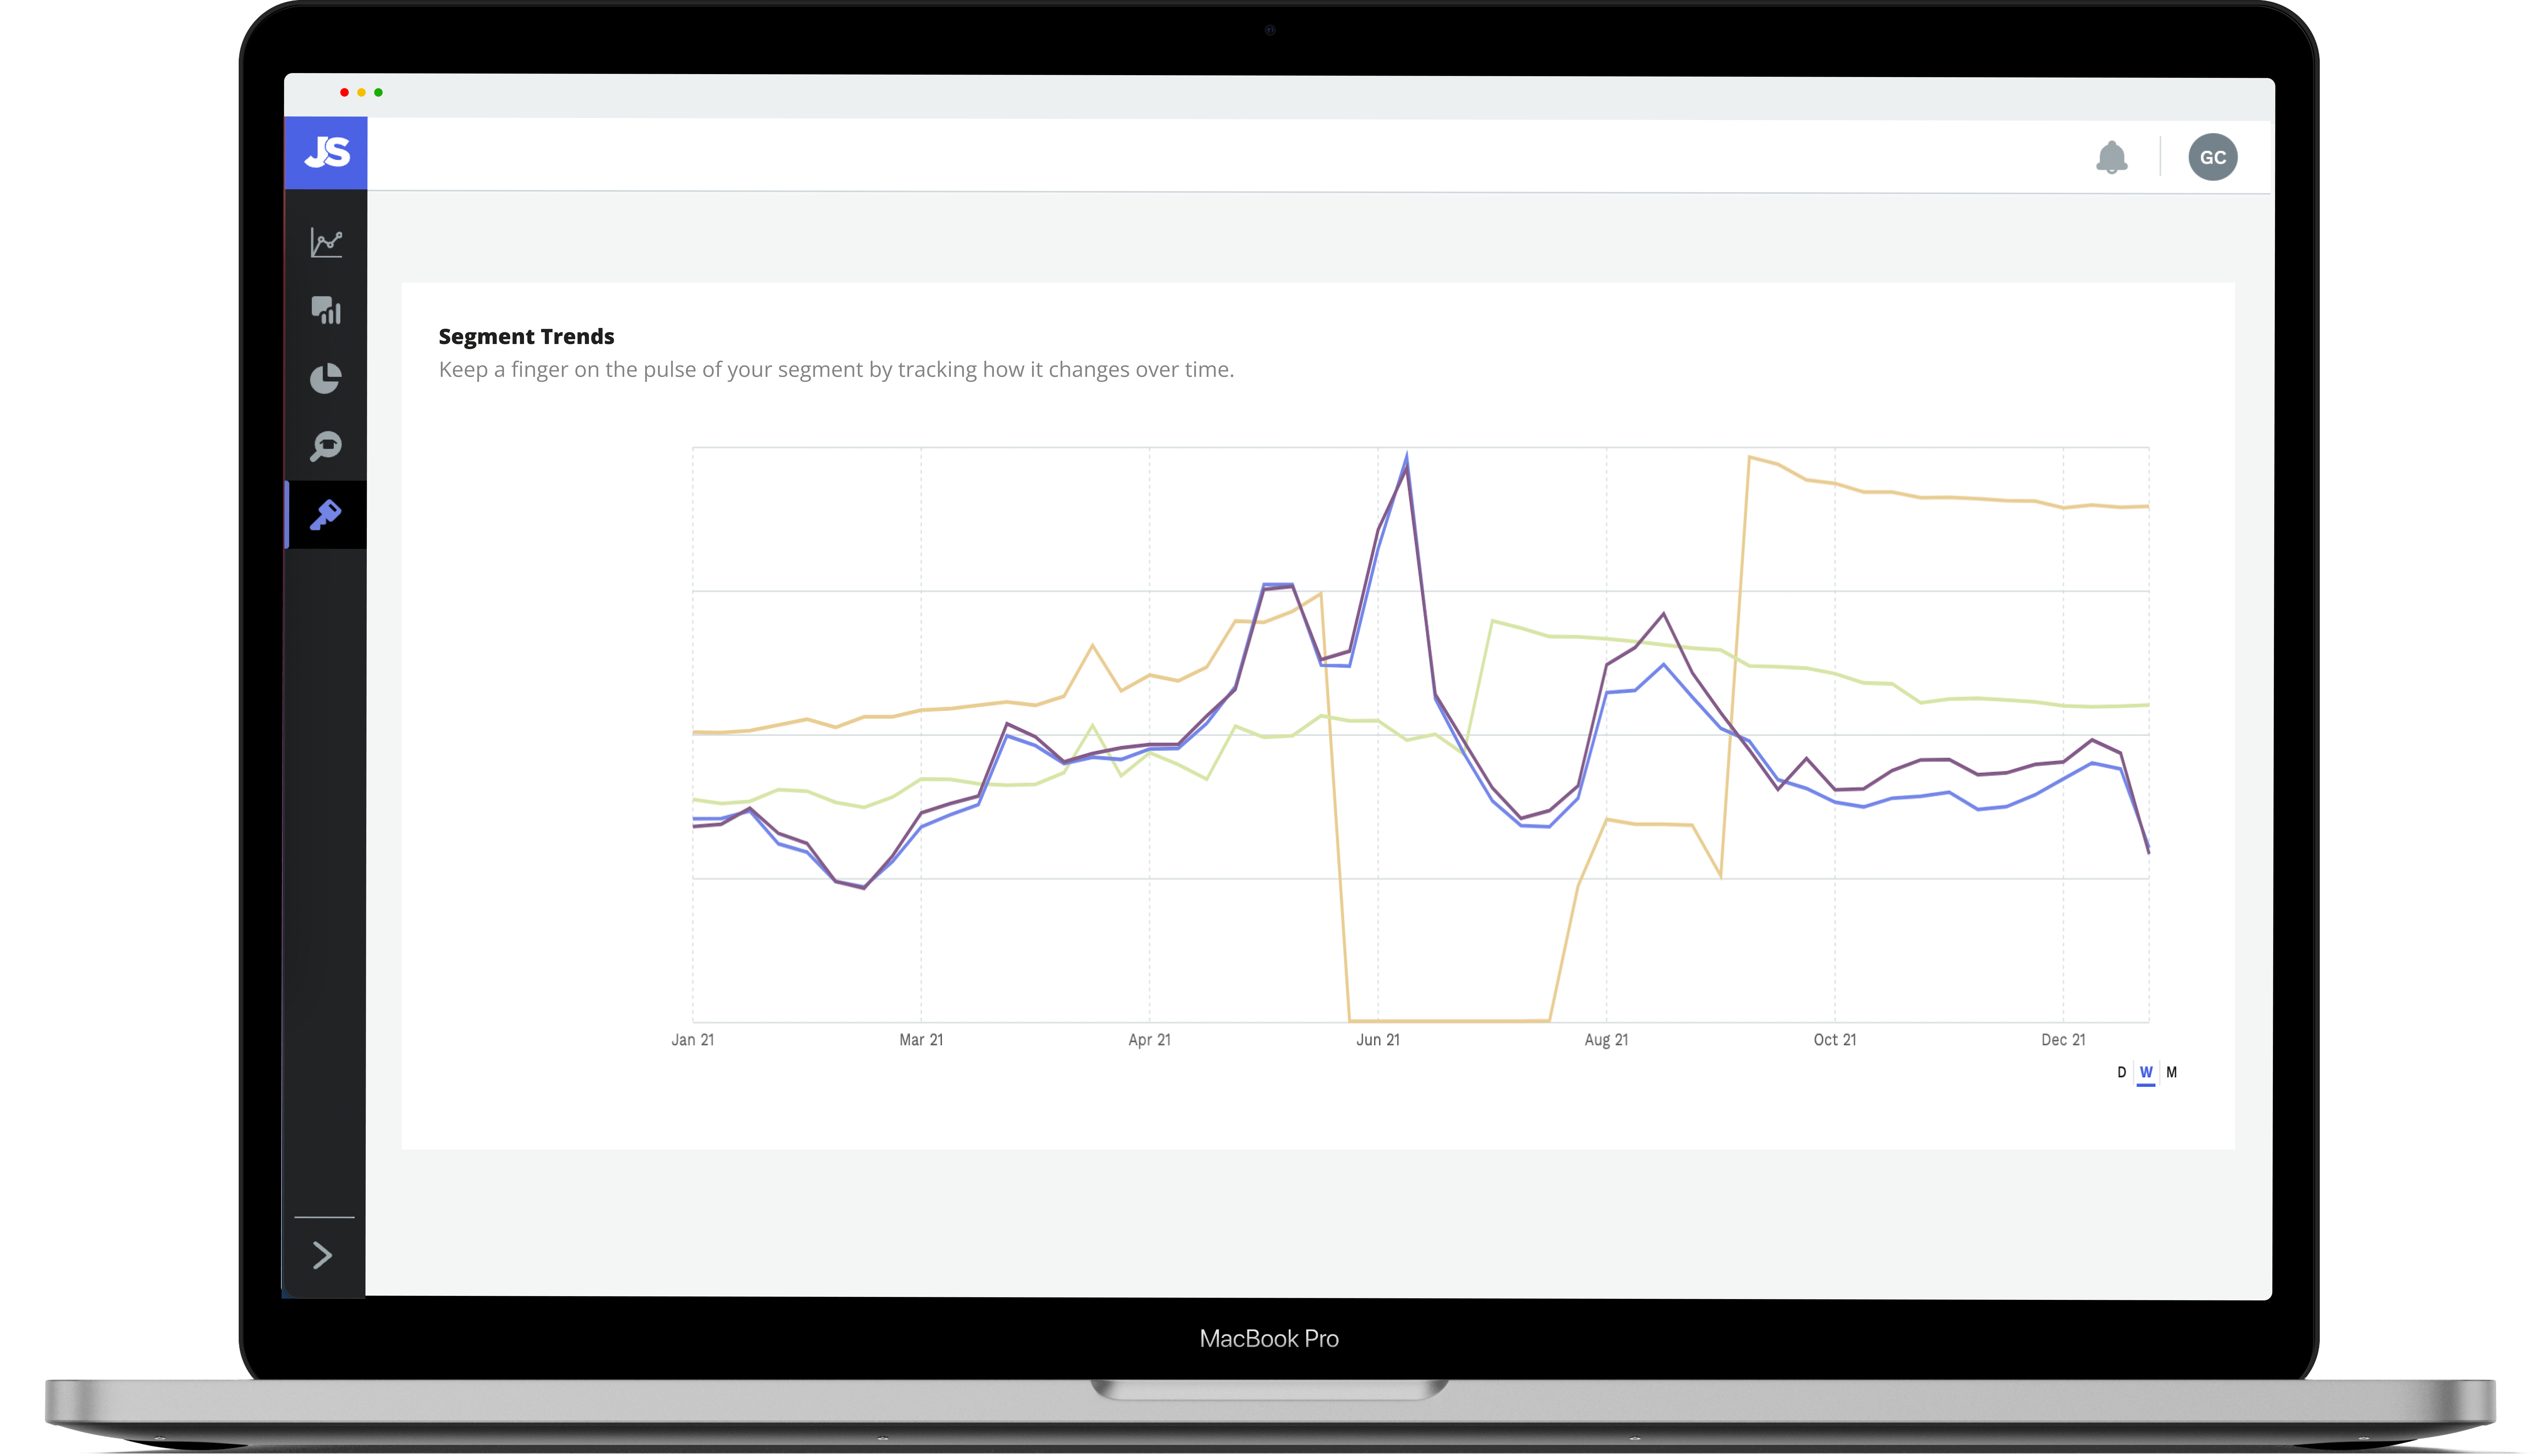 Leverage historical and current data for any Amazon category to track market share changes and product trends.